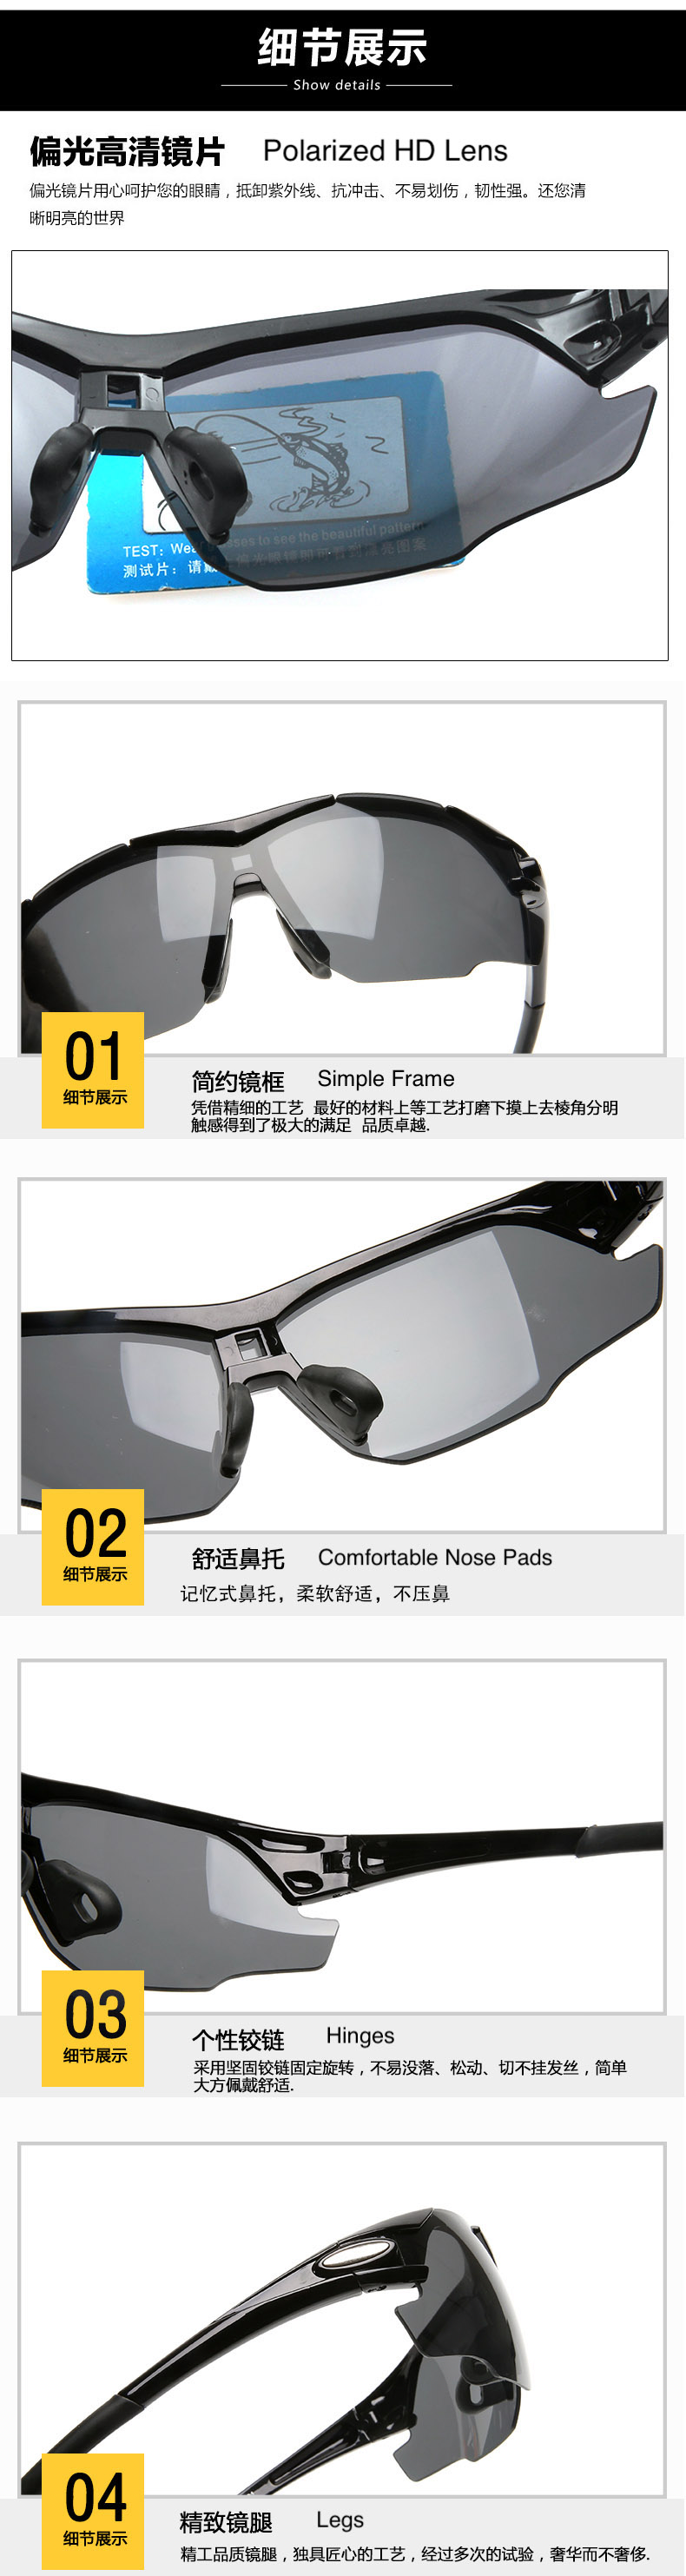 Best Polarized Sunglasses for Sports, China Sports Sunglasses Manufacturers Wholesale